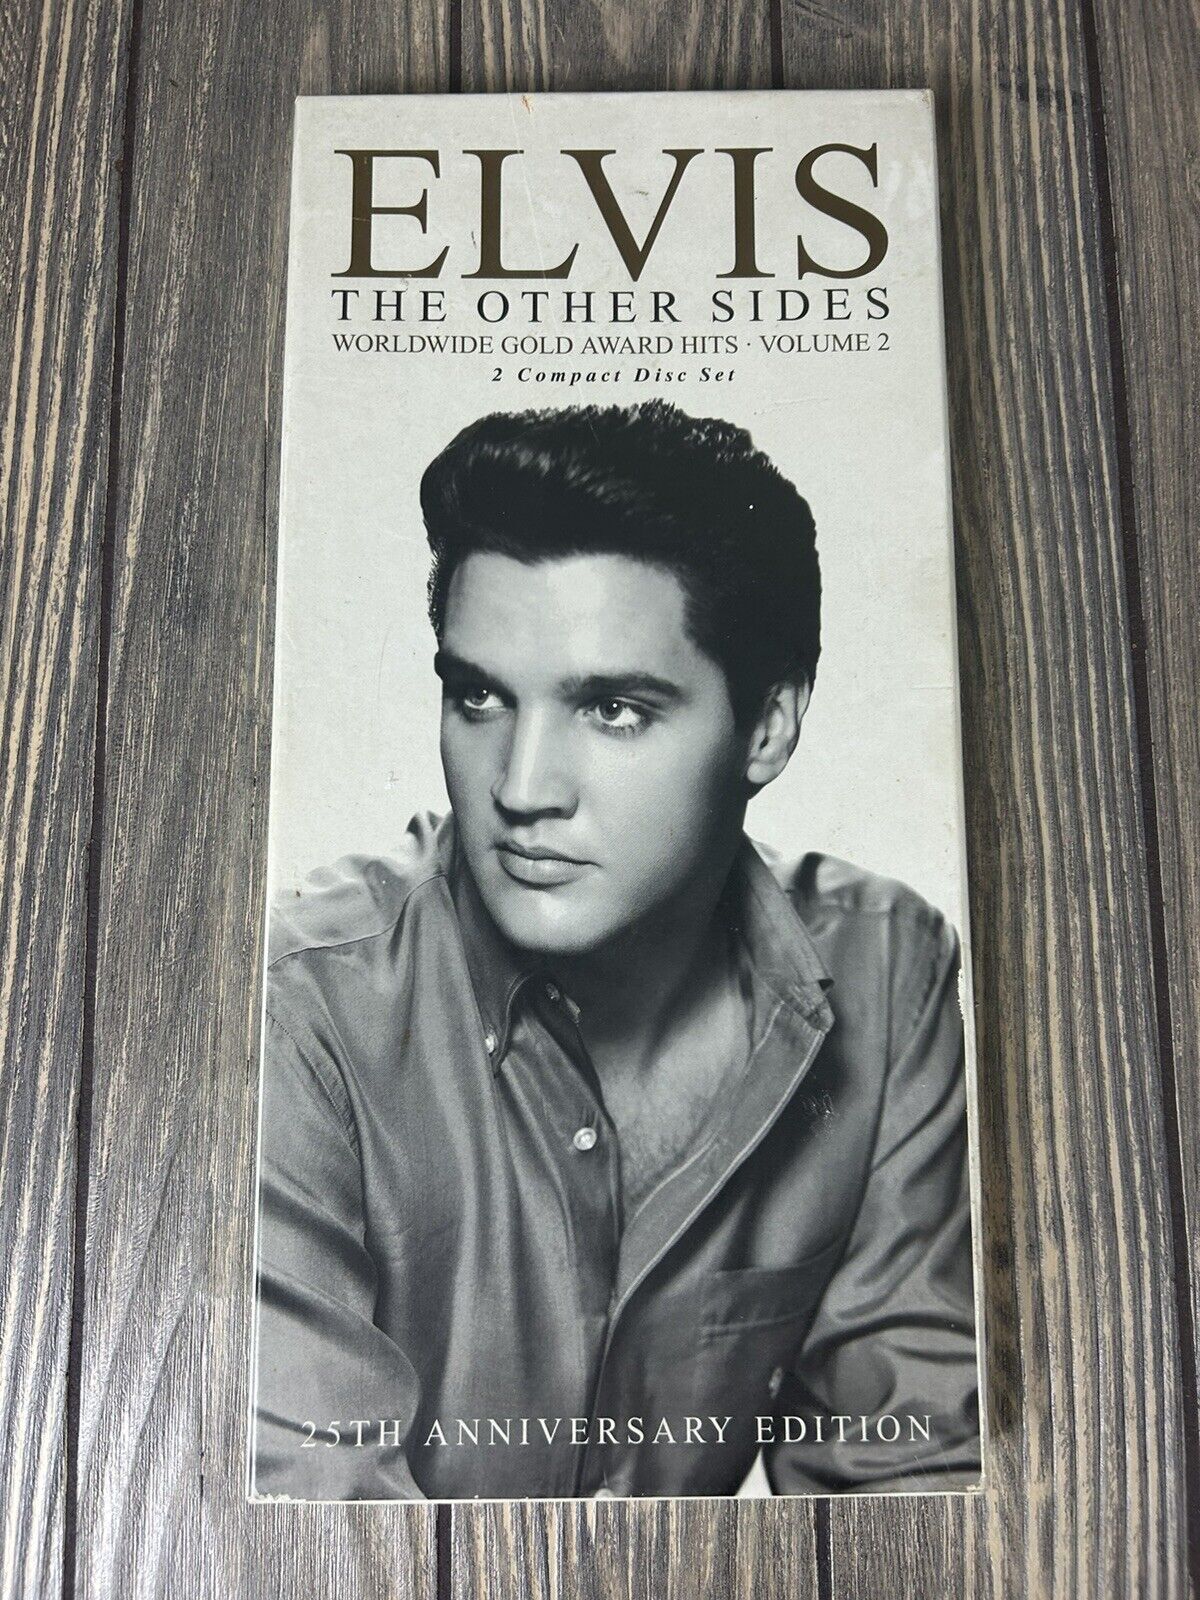 Vintage Elvis The Other Sides Worldwide Gold Award Hits Volume 2 2 Compact Disc 